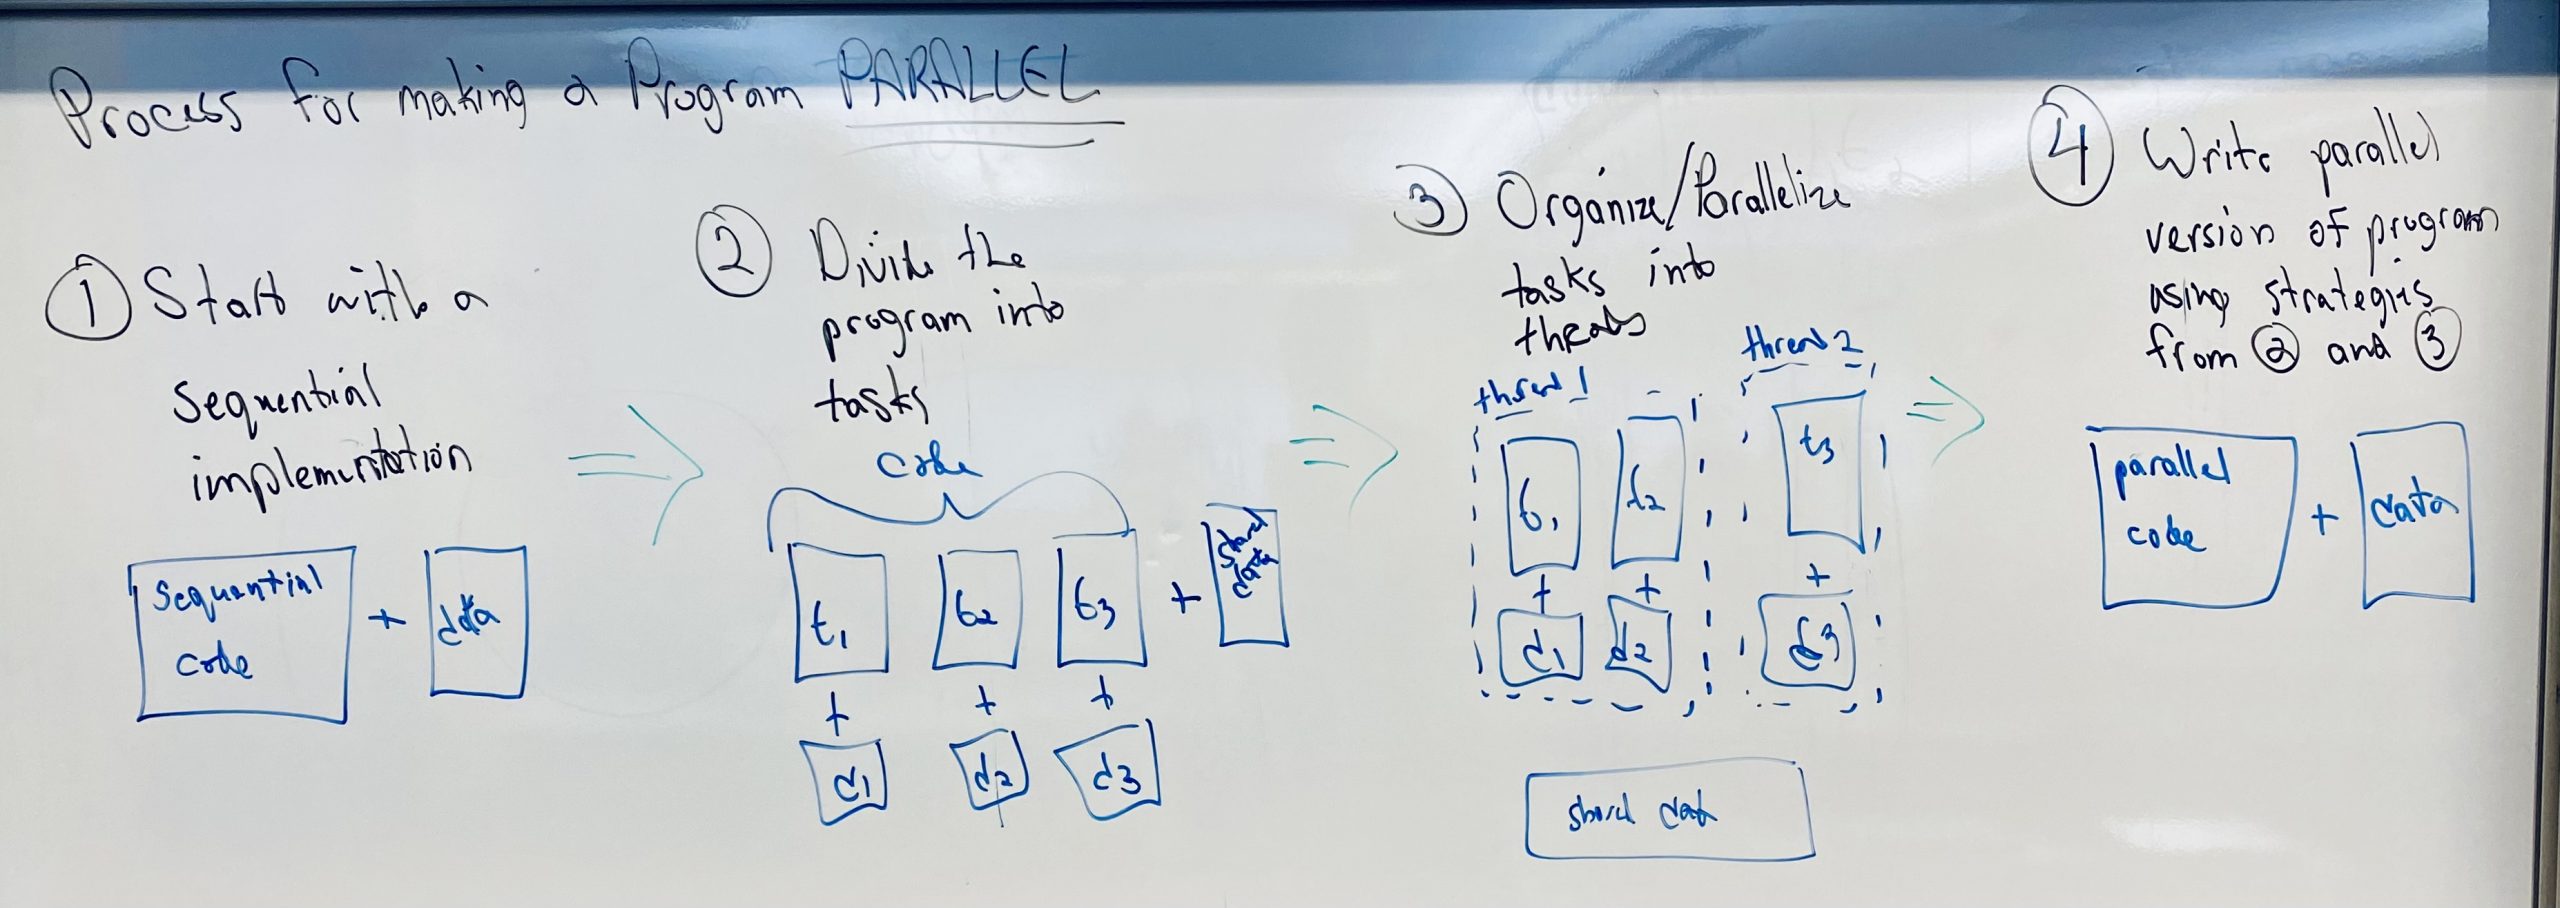 Process for making an algorithm parallel